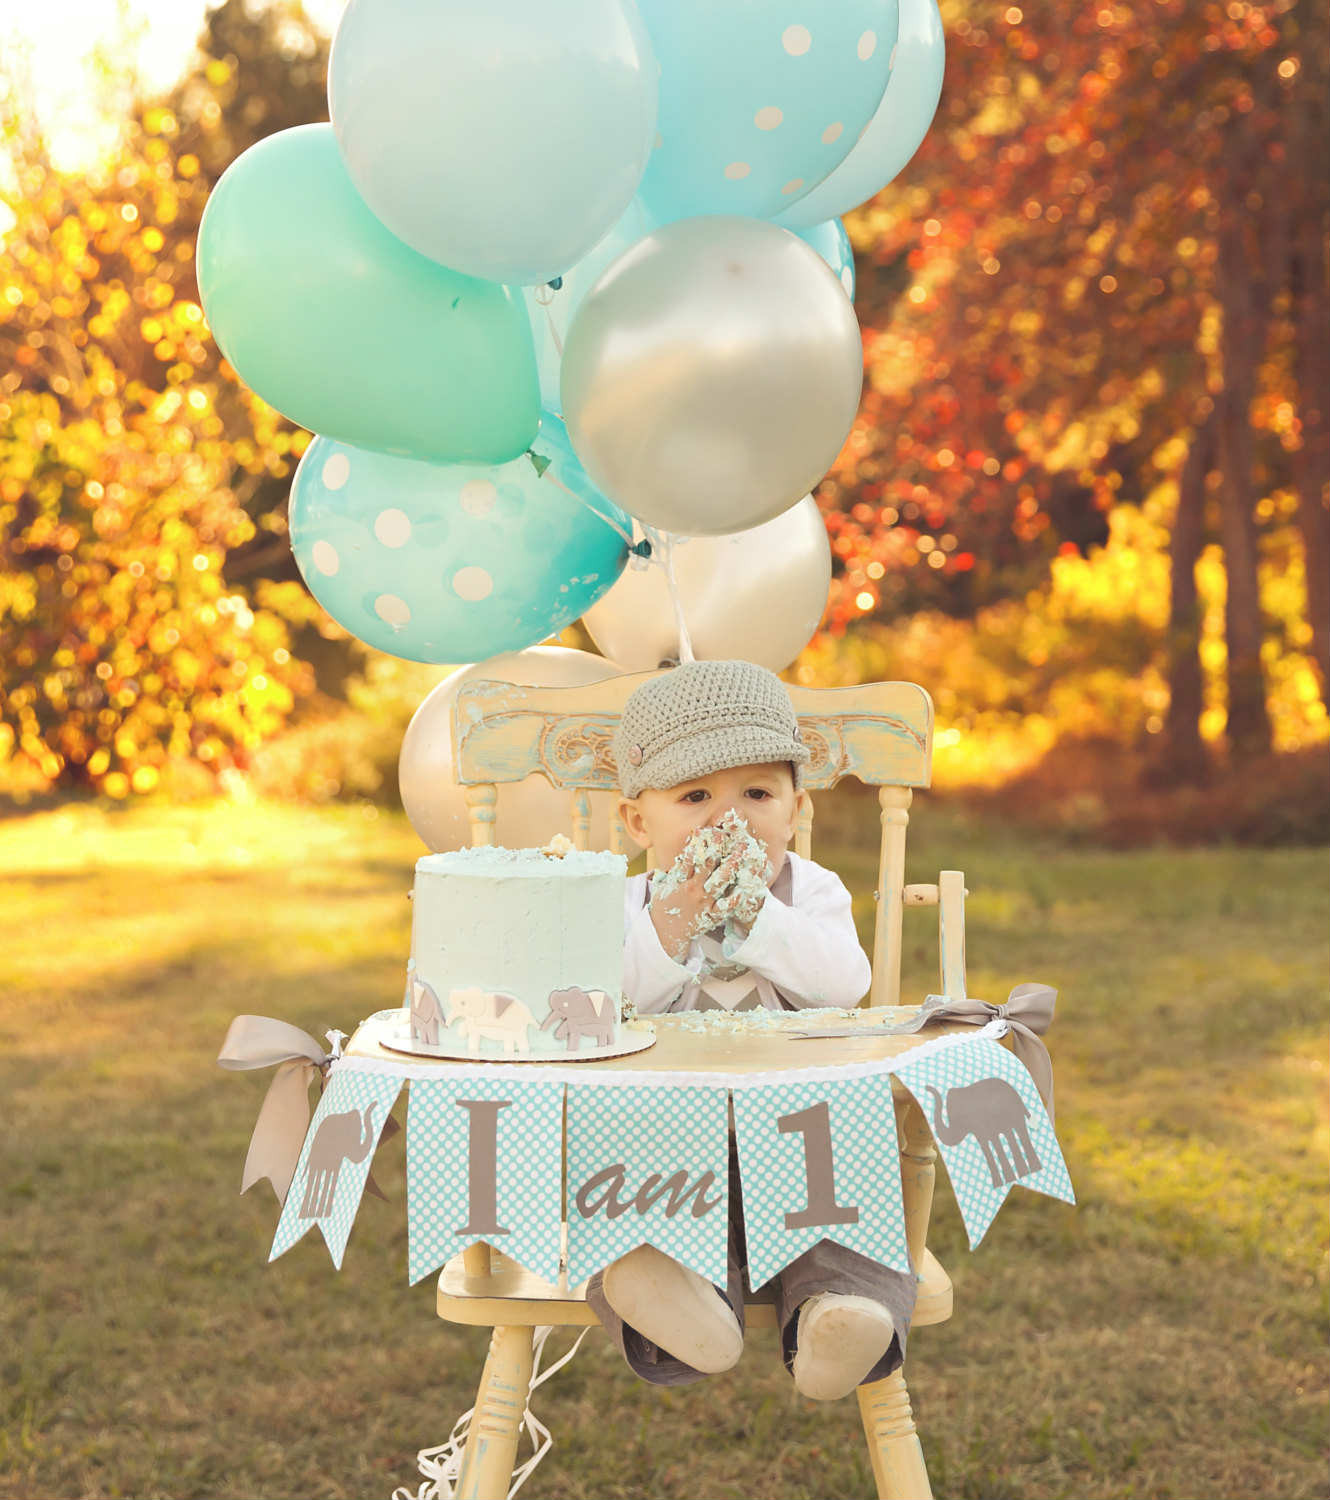 Baby Boy 1st Birthday Decorations
 First Birthday The time to celebrate is here